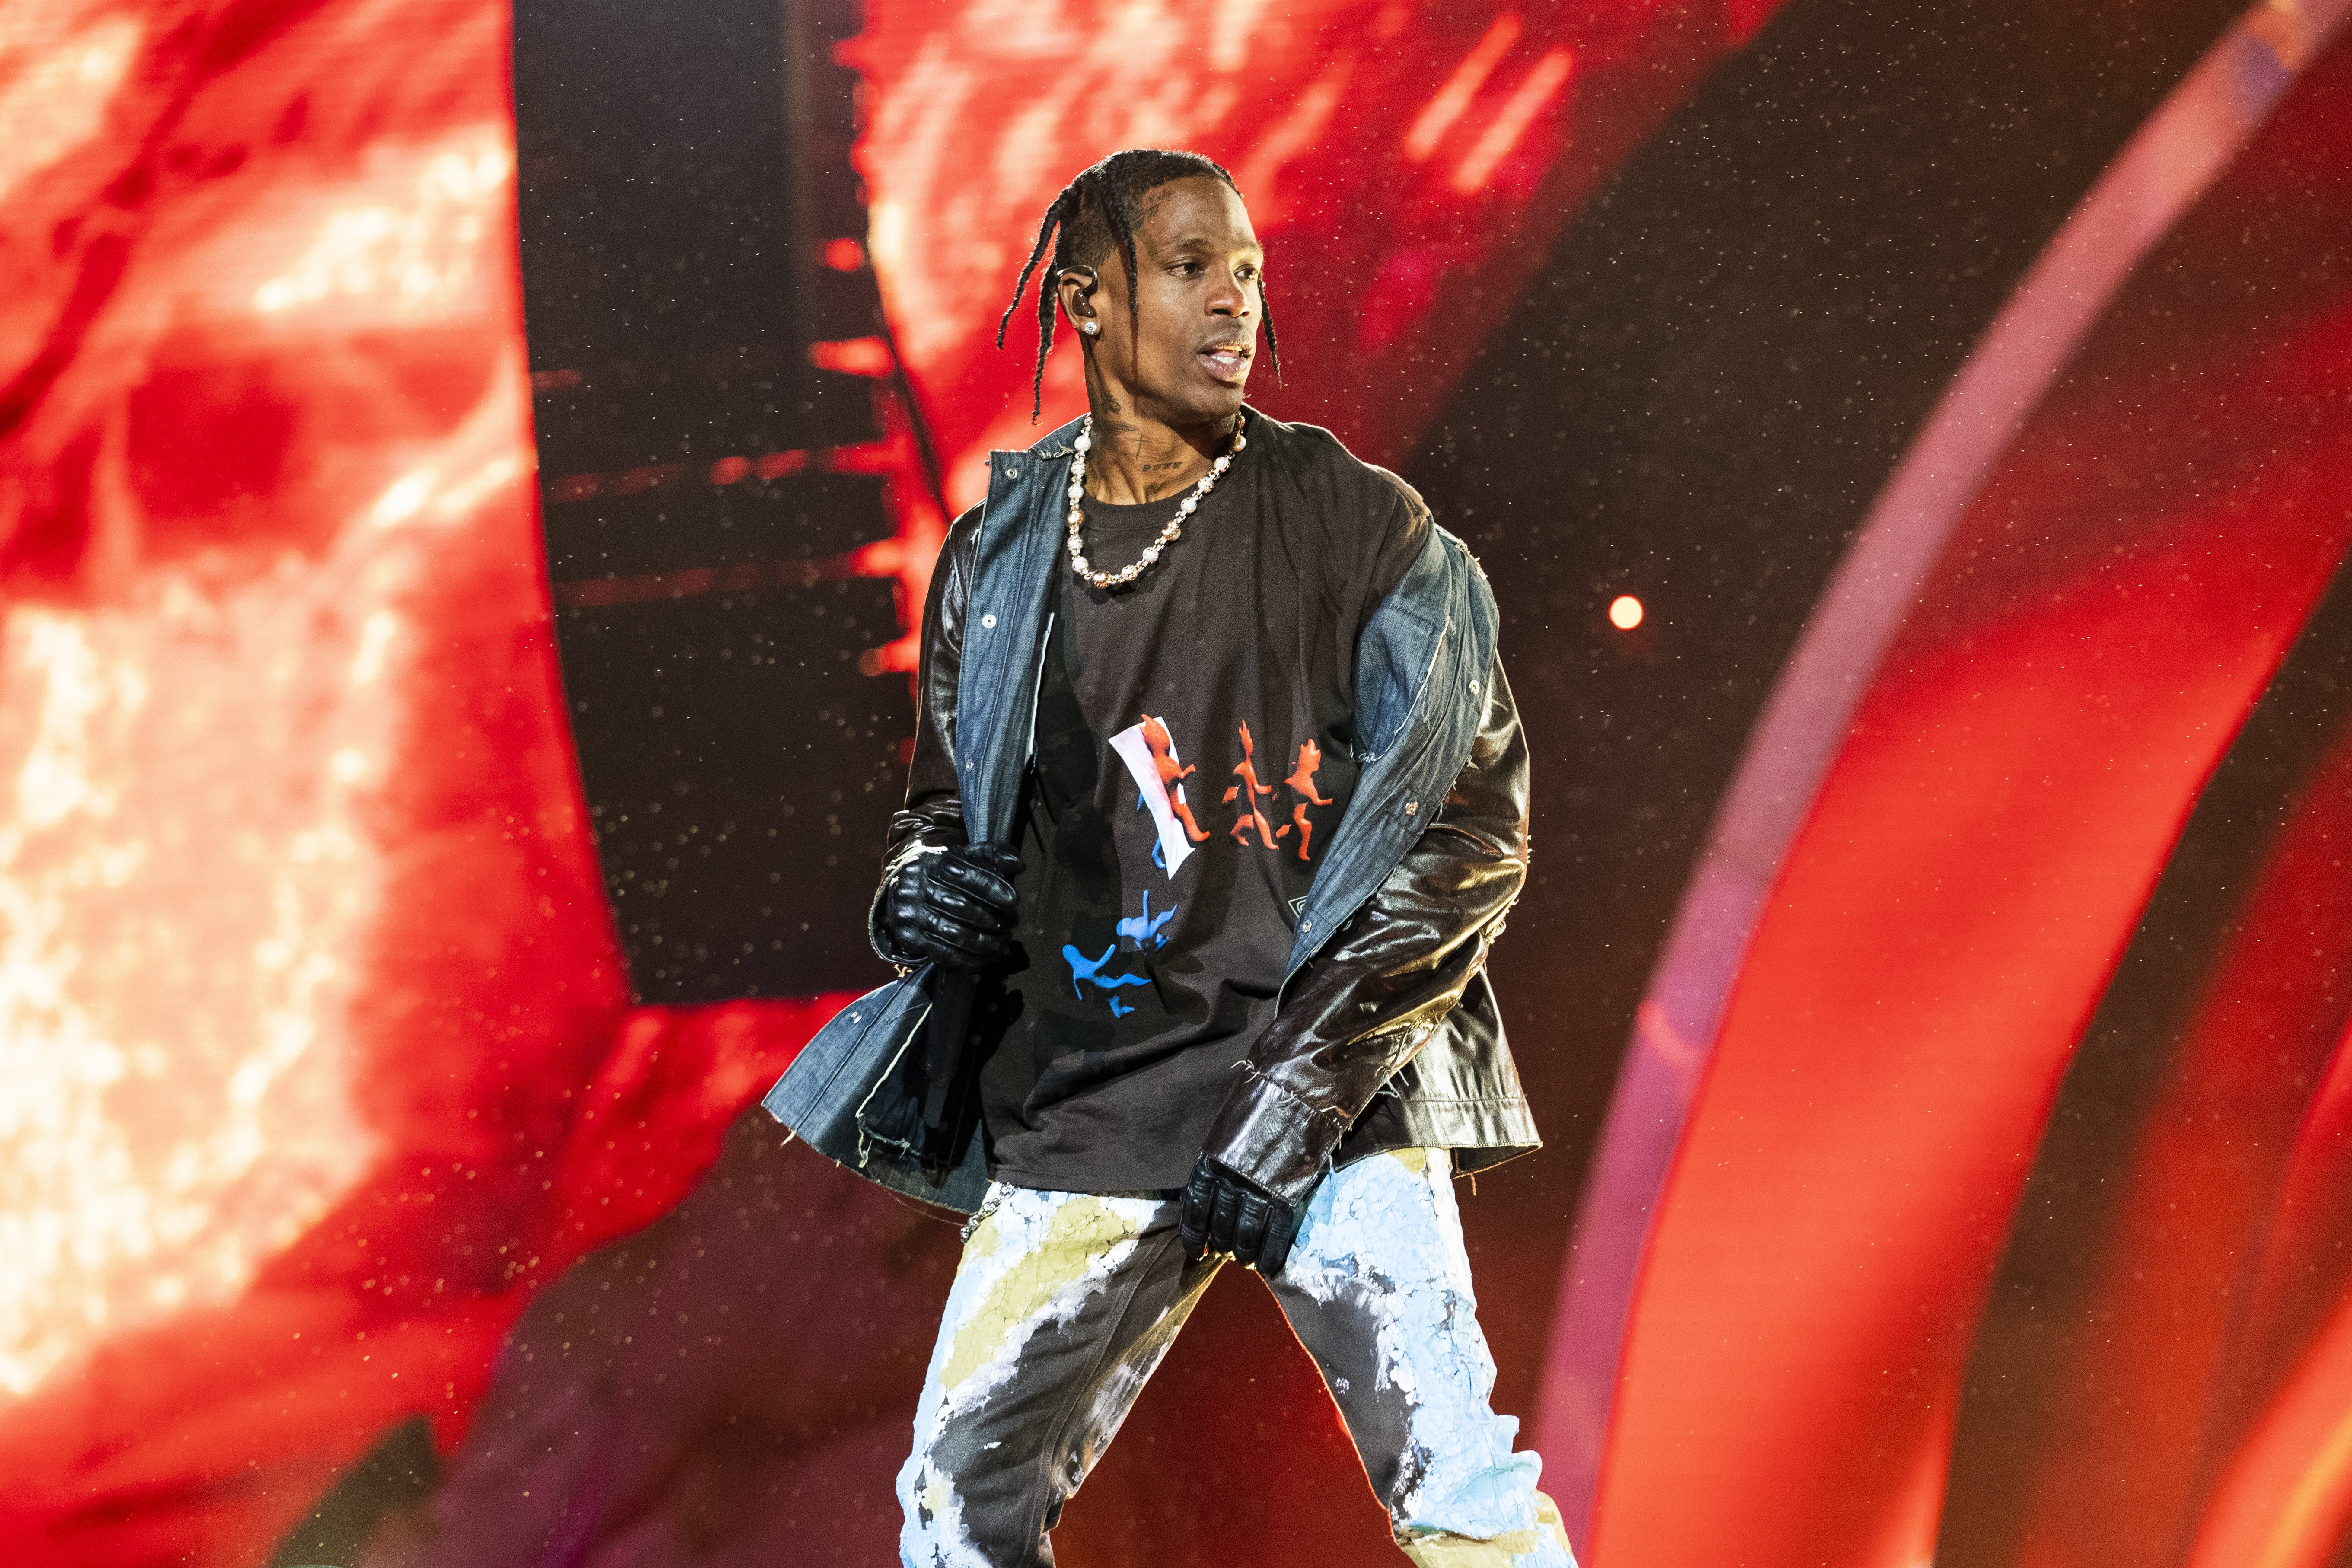 Astroworld Festival 'Had More Security' Than World Series, Mayor Says